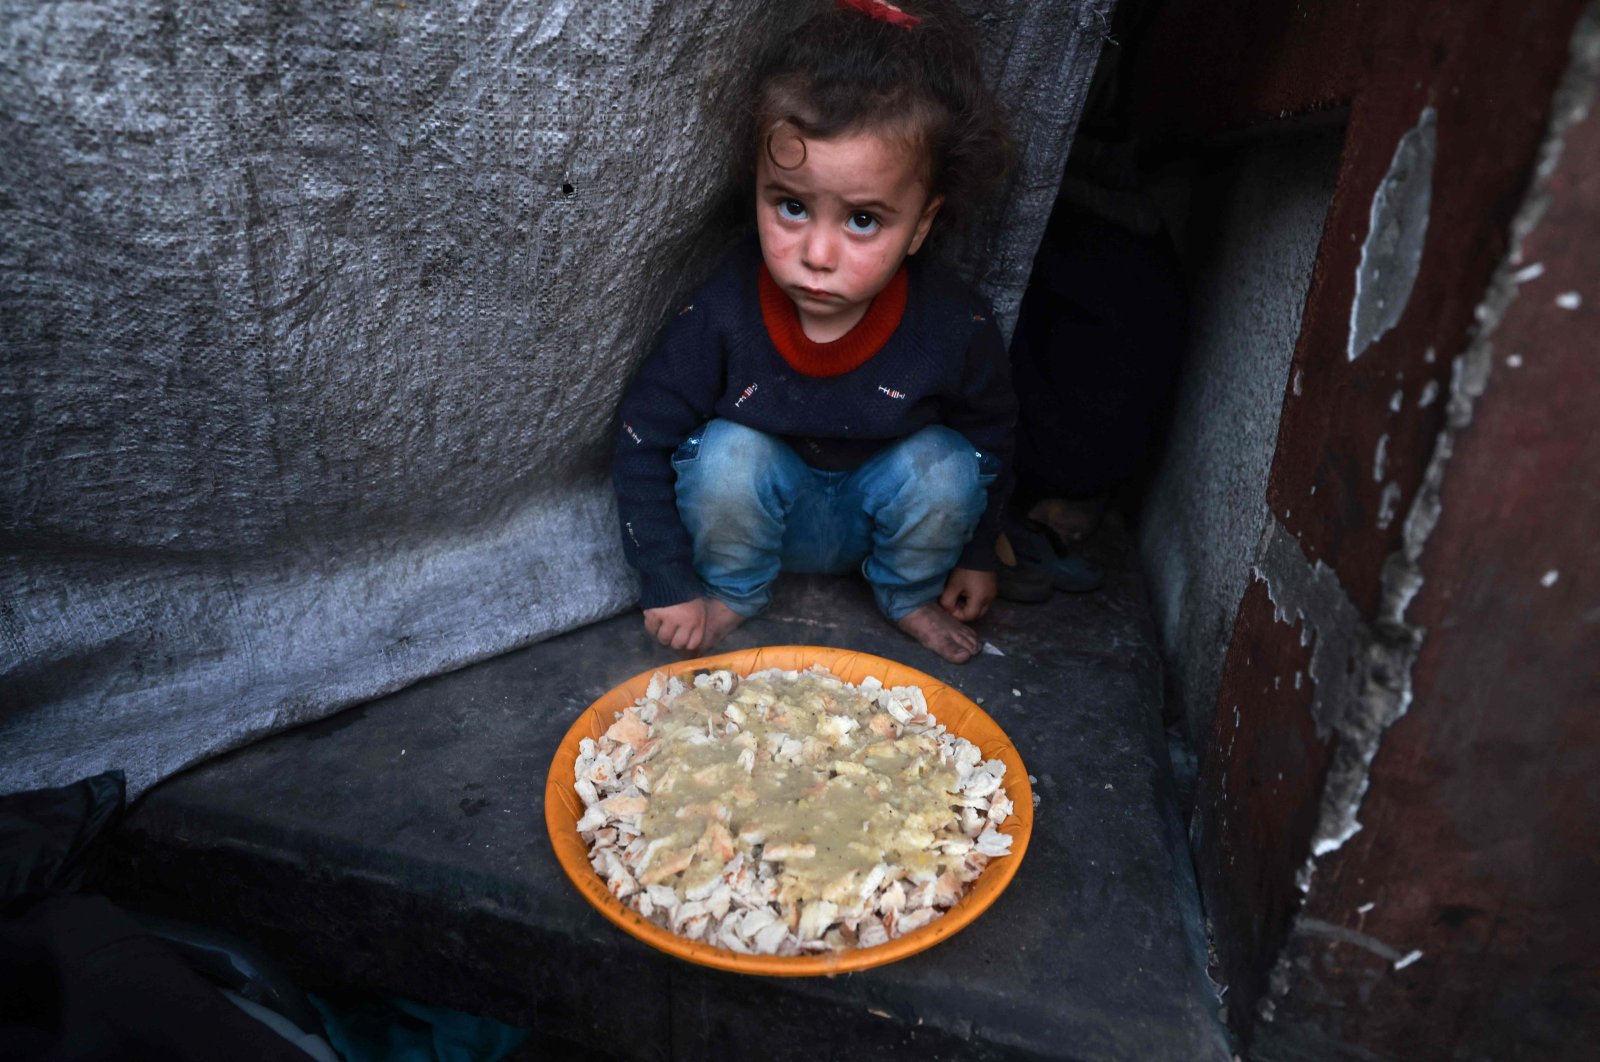 A Palestinian child sits next to a plate before an iftar meal, the breaking of the fast meal, on the second day of the holy fasting month of Ramadan, at a shelter for displaced people in Rafah, in the southern Gaza Strip, Palestine, March 12, 2024. (AFP Photo)